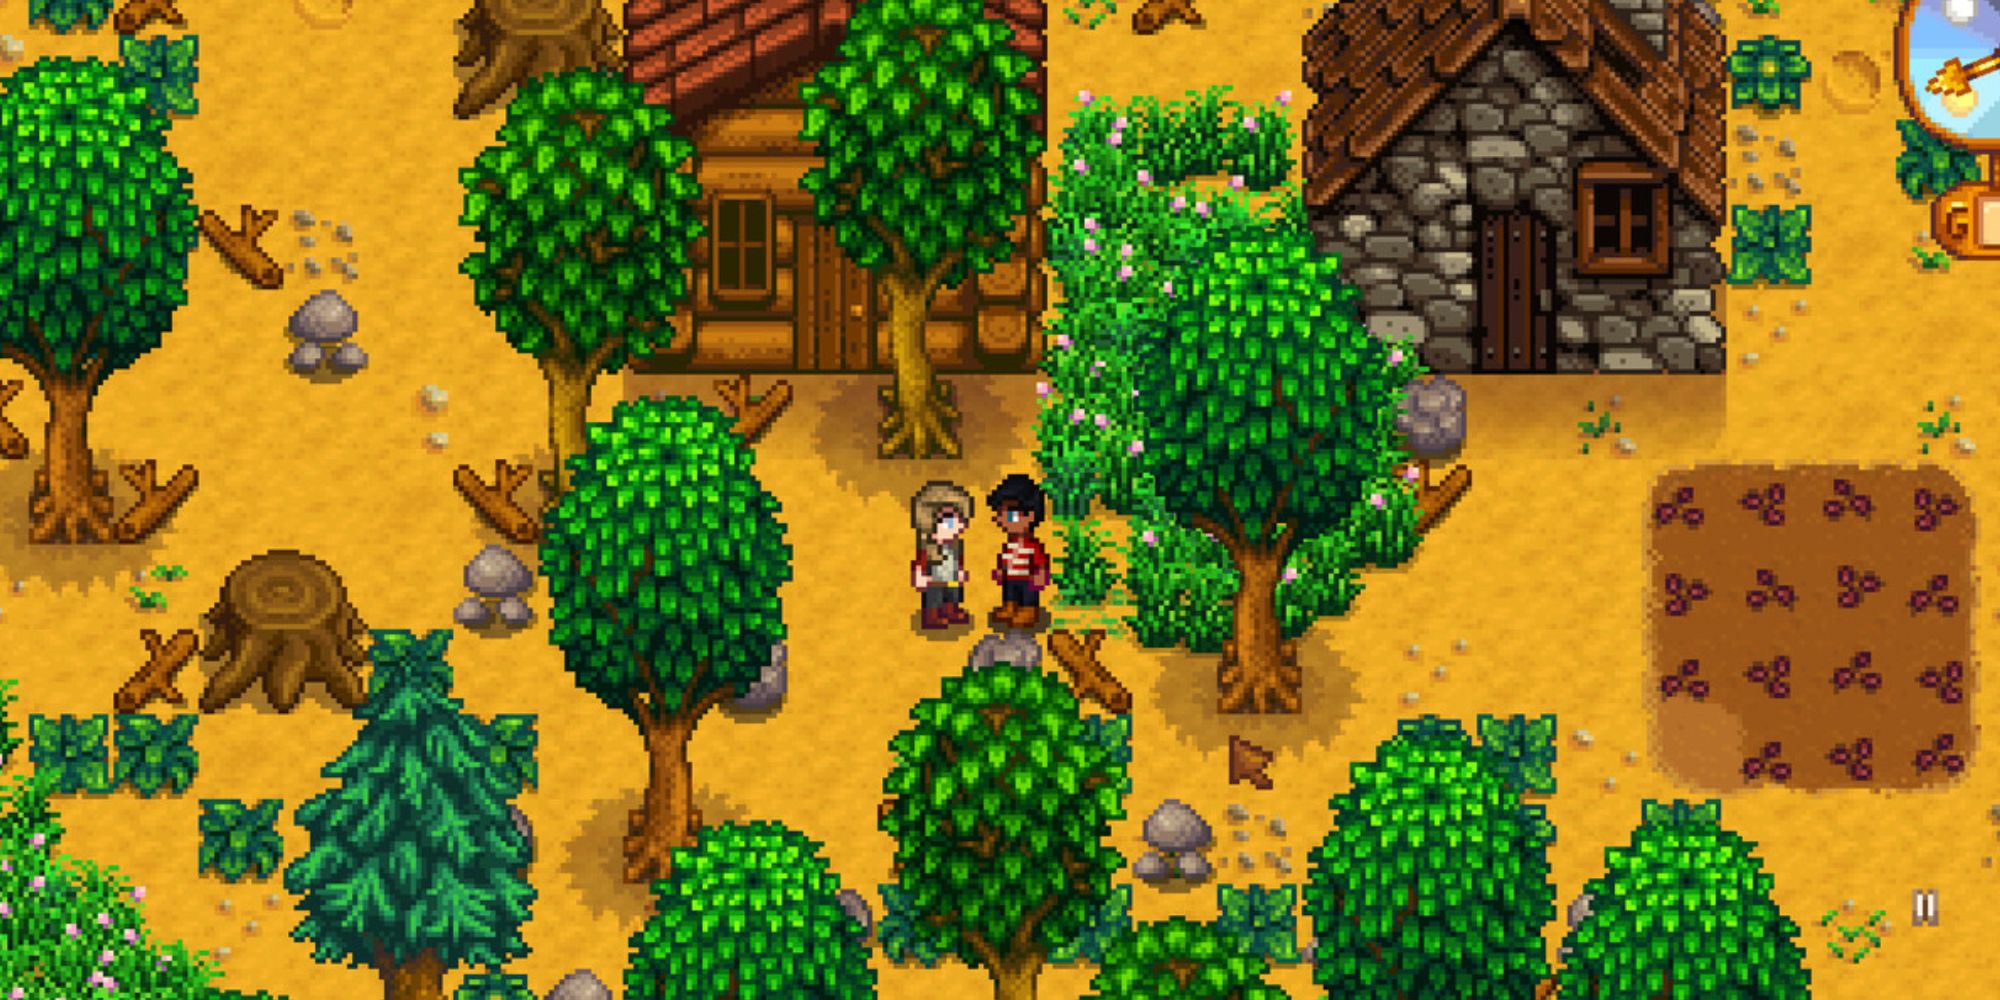 Two players in Stardew Valley looking at each other in a forest